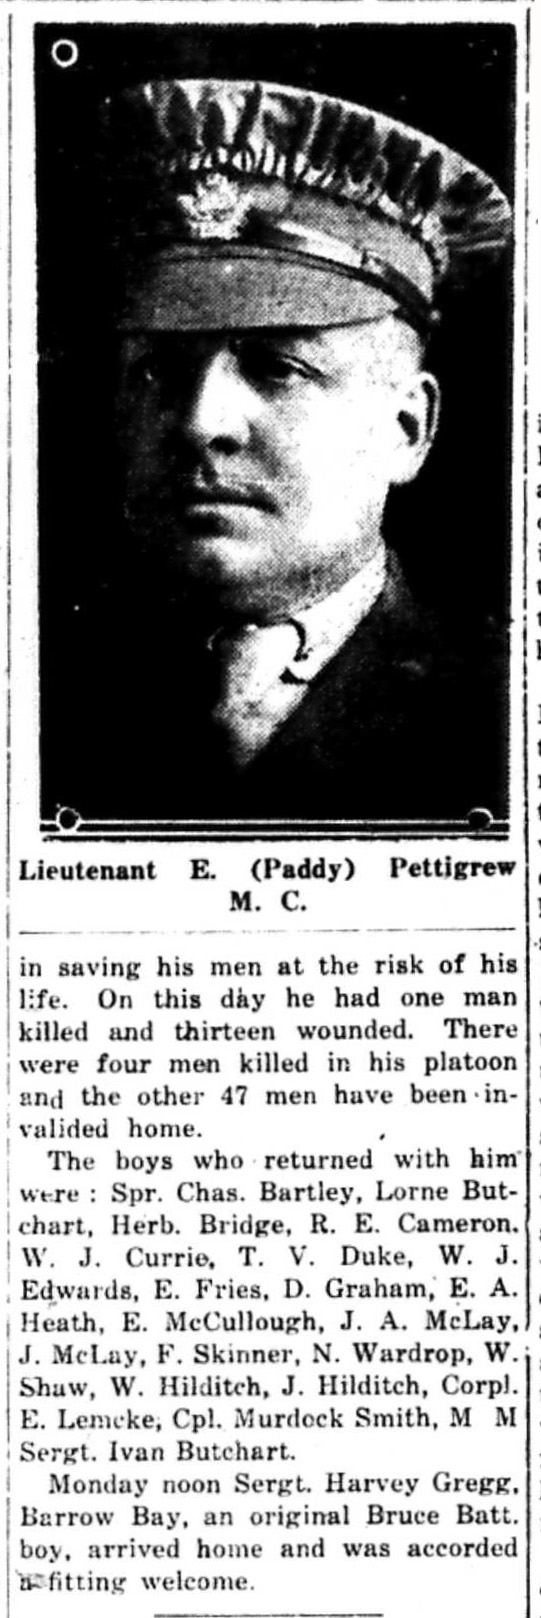 Canadian Echo, May 21, 1919, Part 2